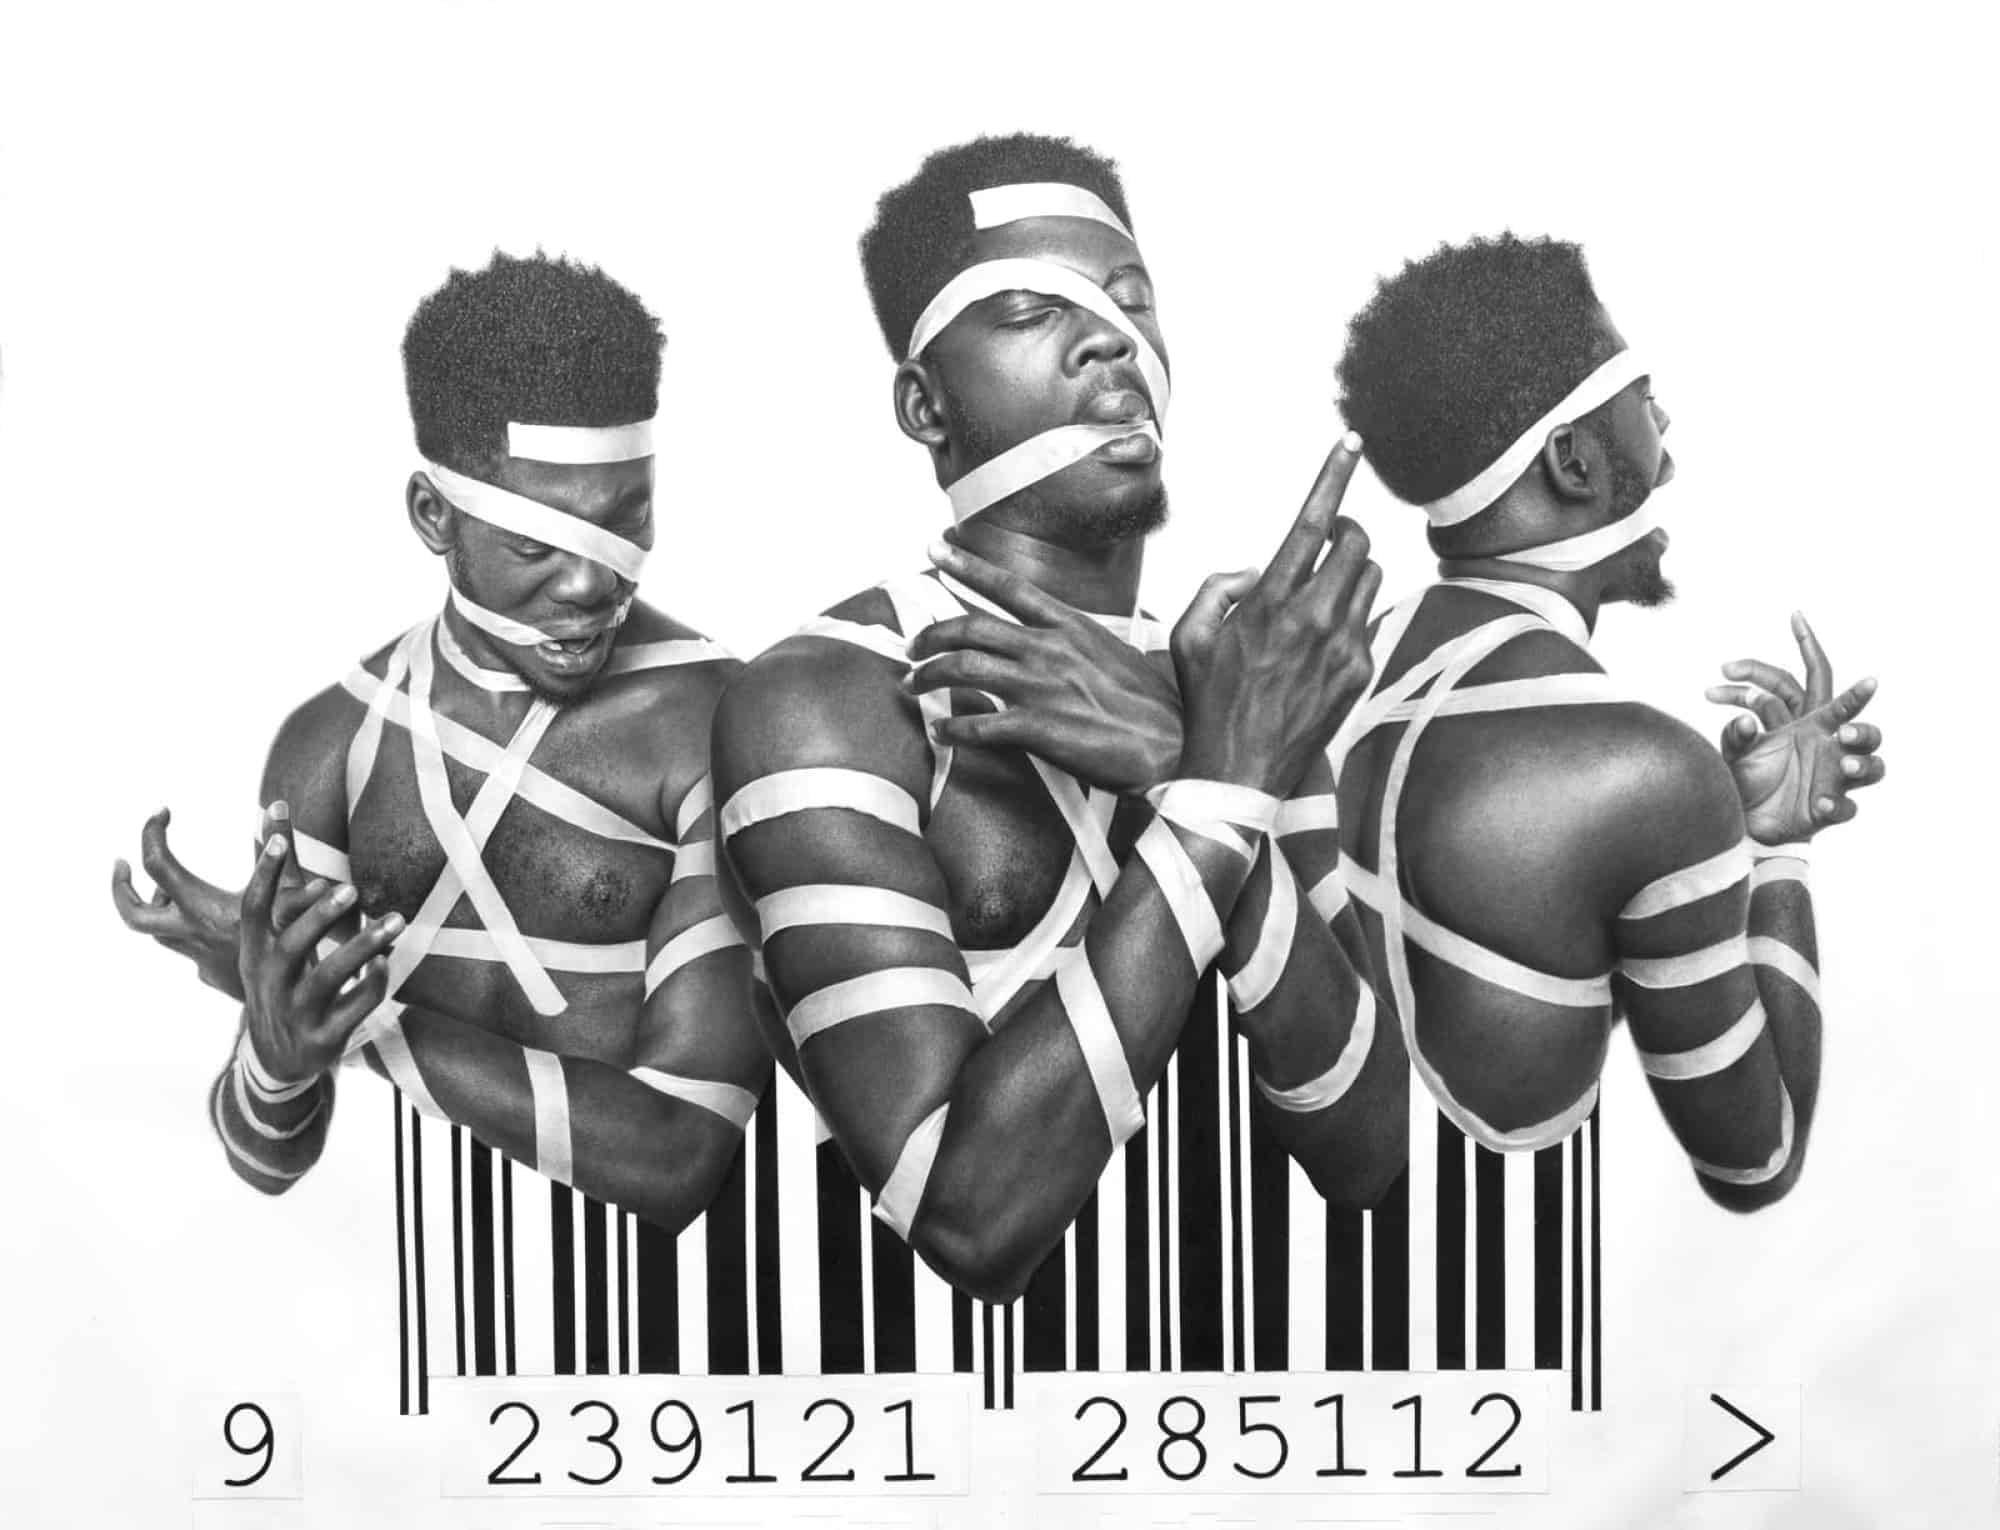 Three images of a man bound in white tape, the tape leading into a barcode below.